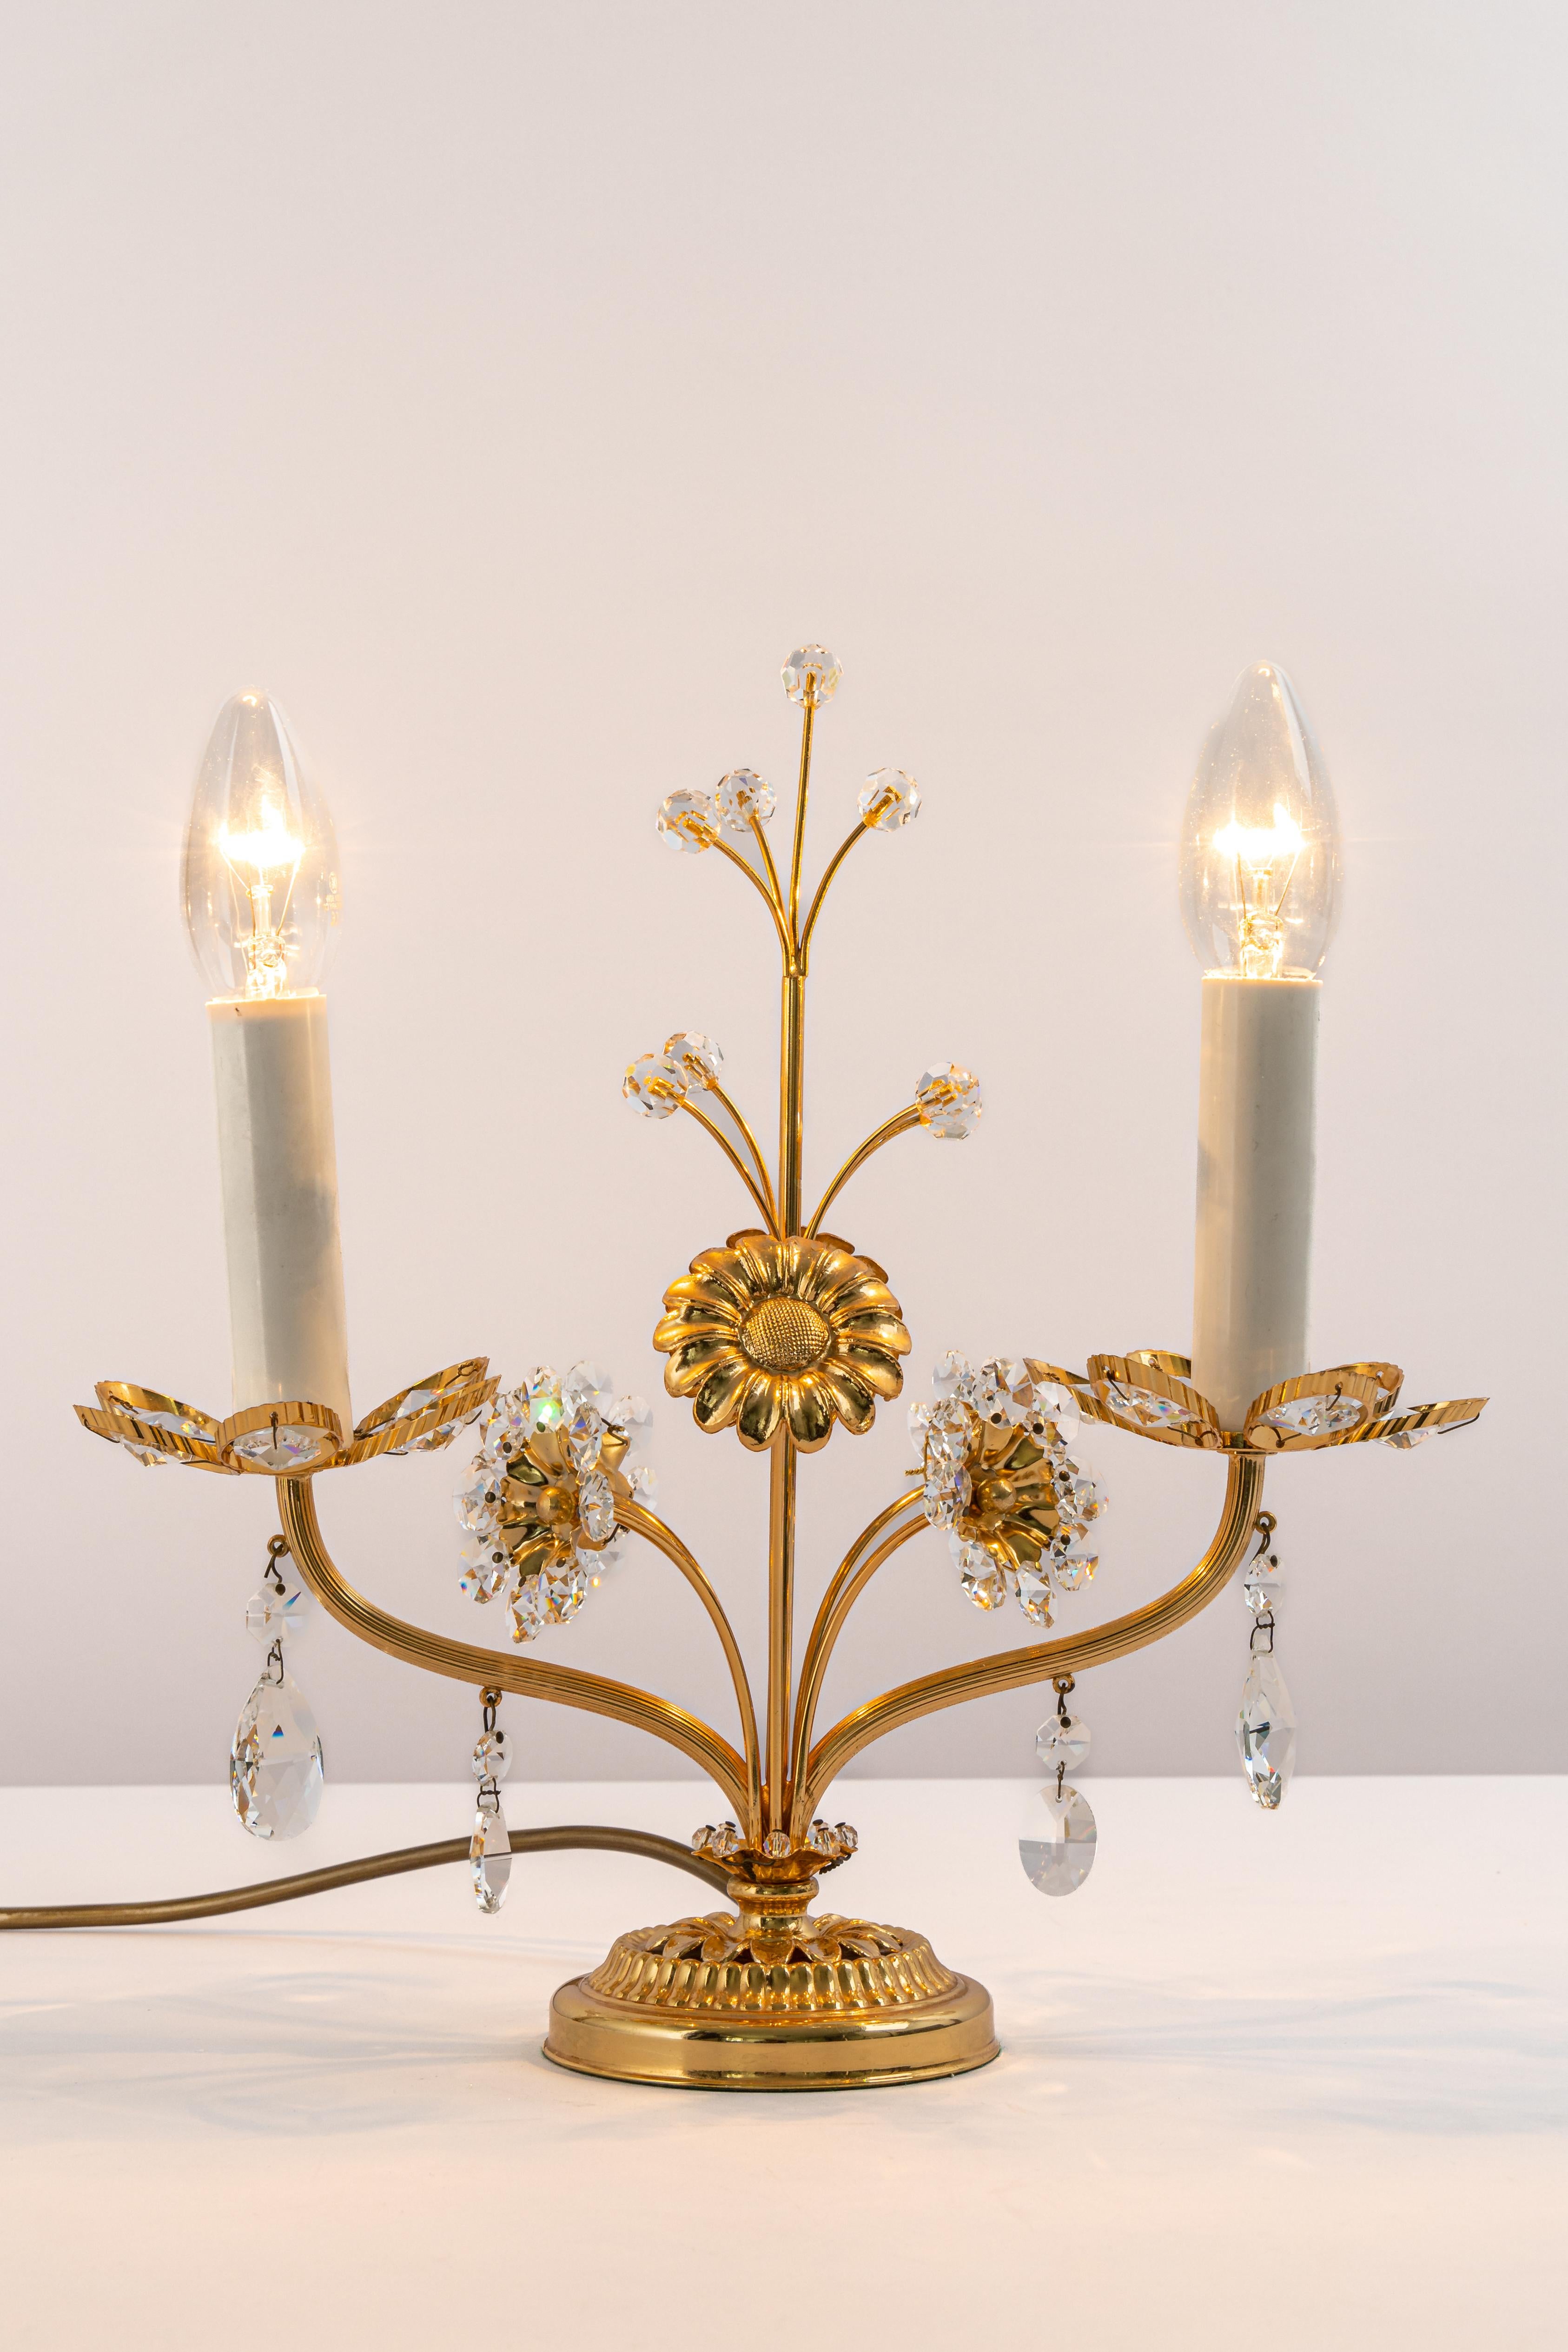 Petite stunning table lamp by Palwa, Germany, 1970s
Gilded brass frame and crystal glasses.

Sockets: The table lamp needs 2 x E14 small bulbs to illuminate.
Light bulbs are not included. It is possible to install this fixture in all countries